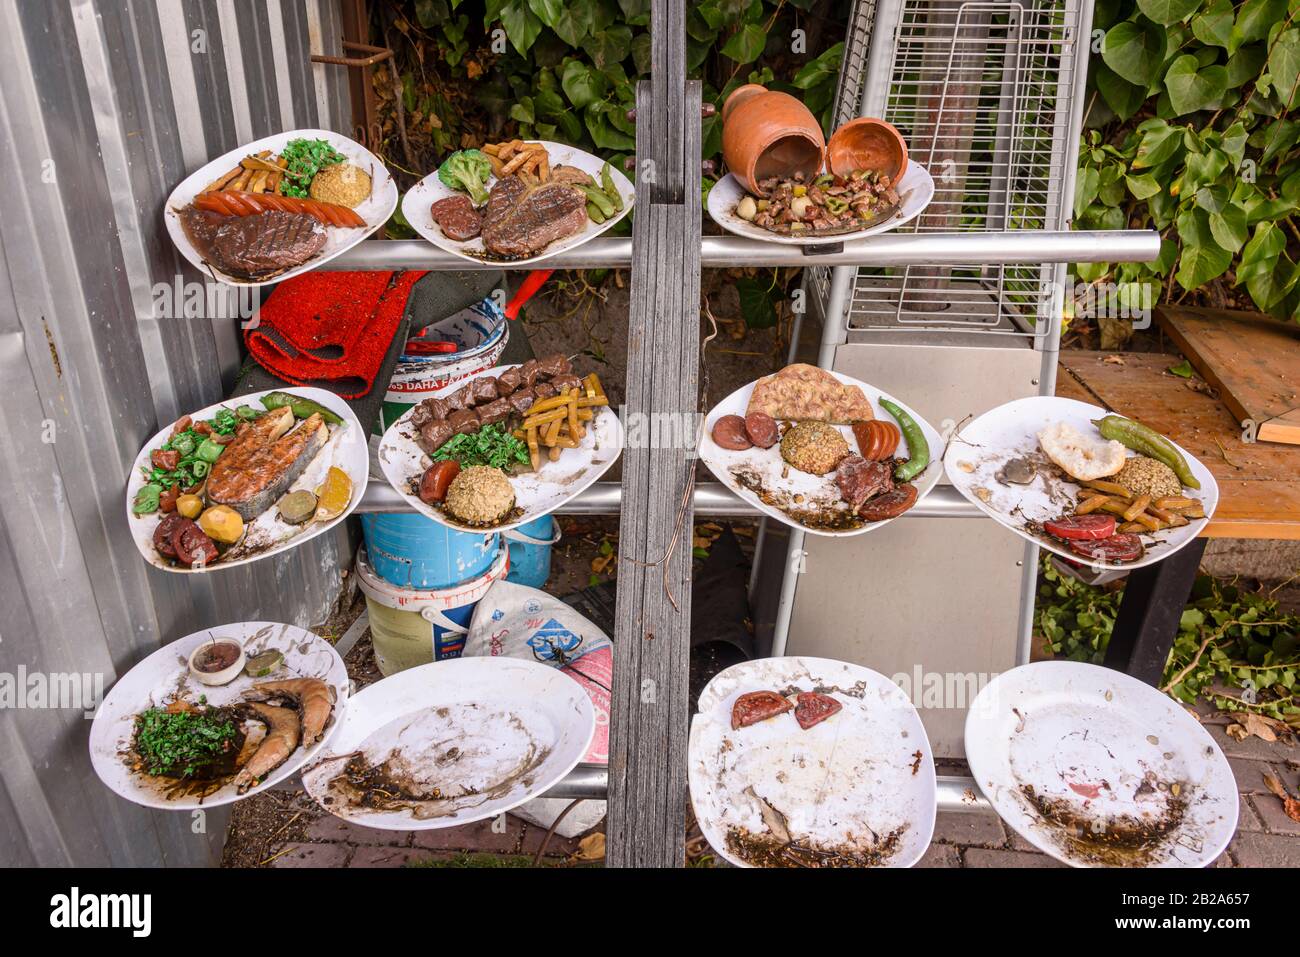 Plates of rotting food outside a former restaurant, Istanbul, Turkey Stock Photo